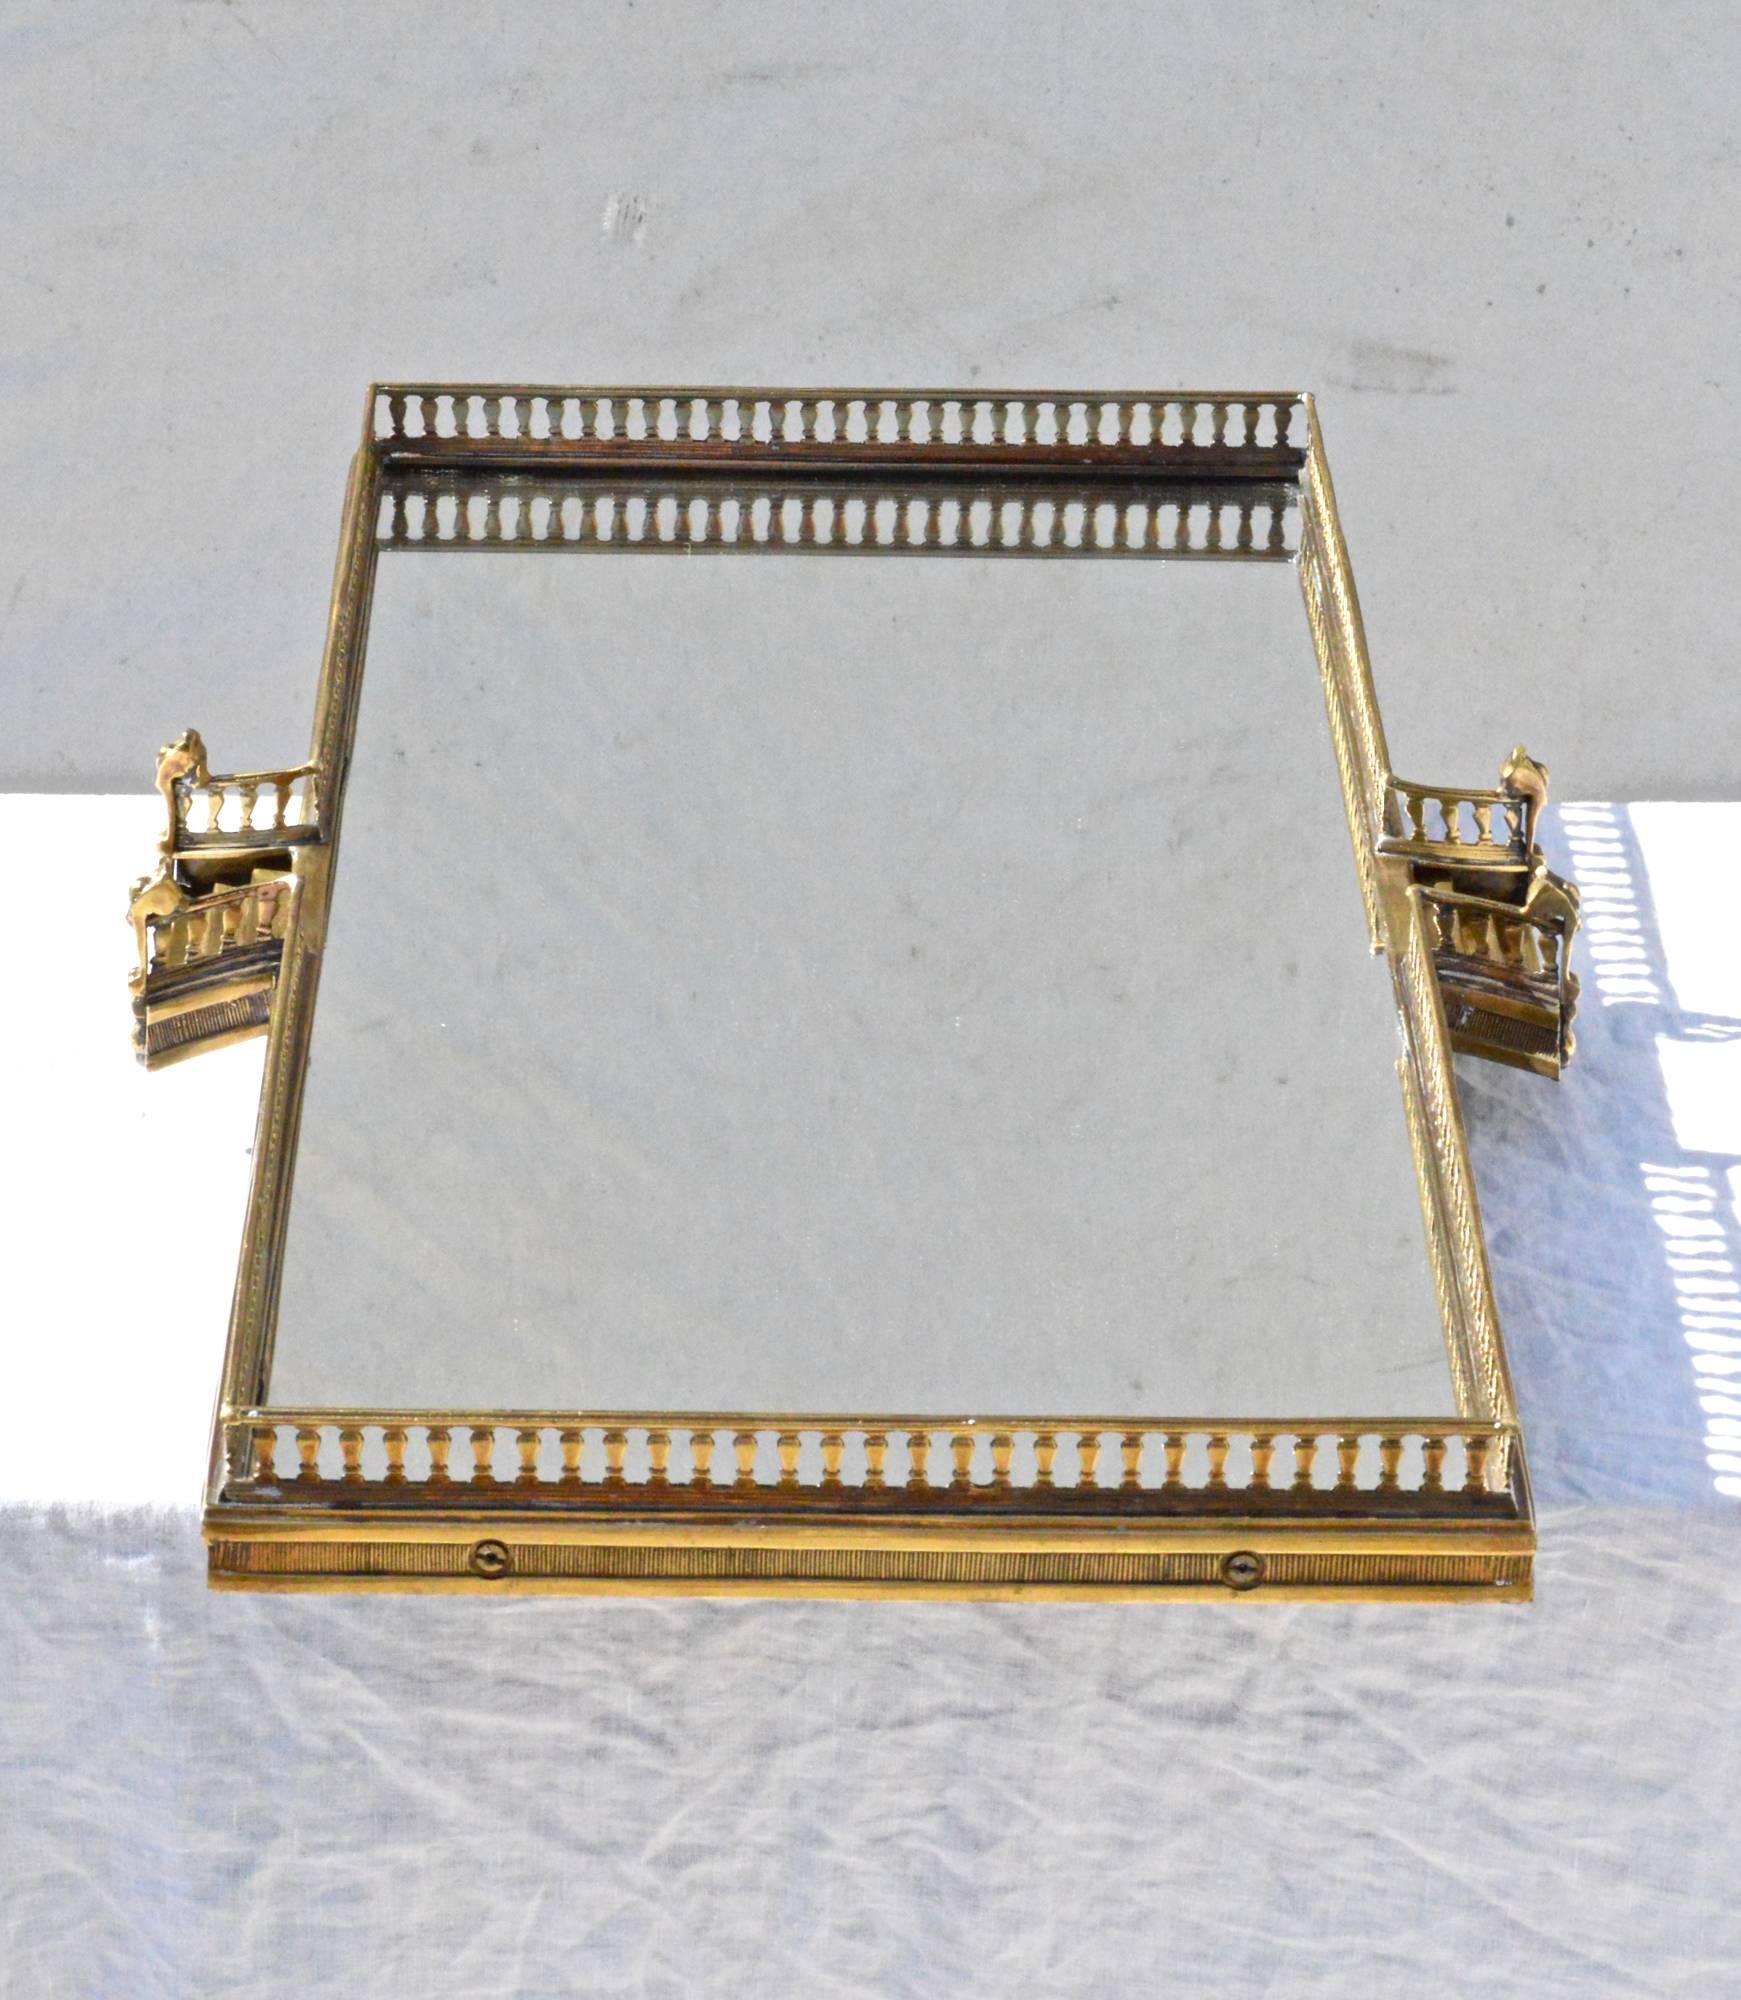 Regency Revival Brass Serving Tray/Plateau with Stairs